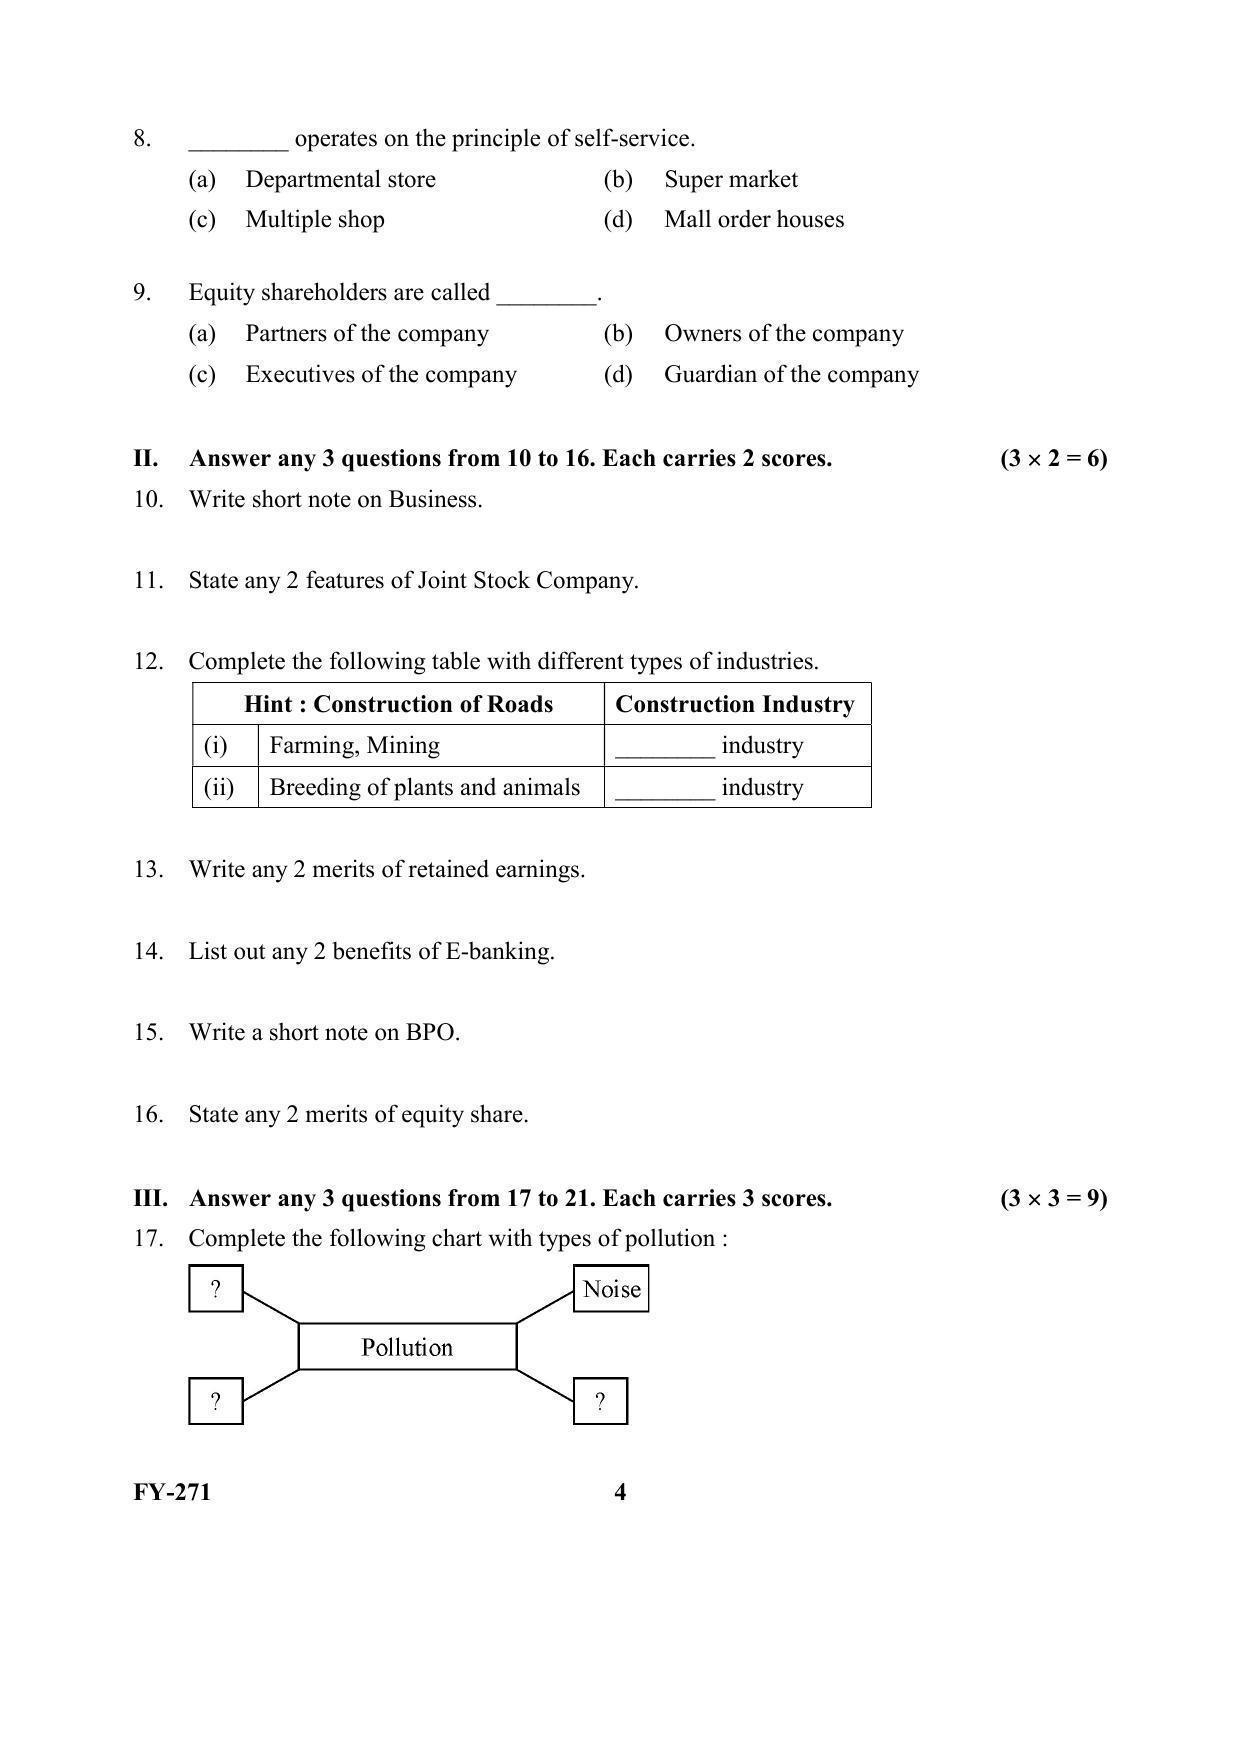 Kerala Plus One (Class 11th) Business Studies -Hearing Impaired Question Paper 2021 - Page 4